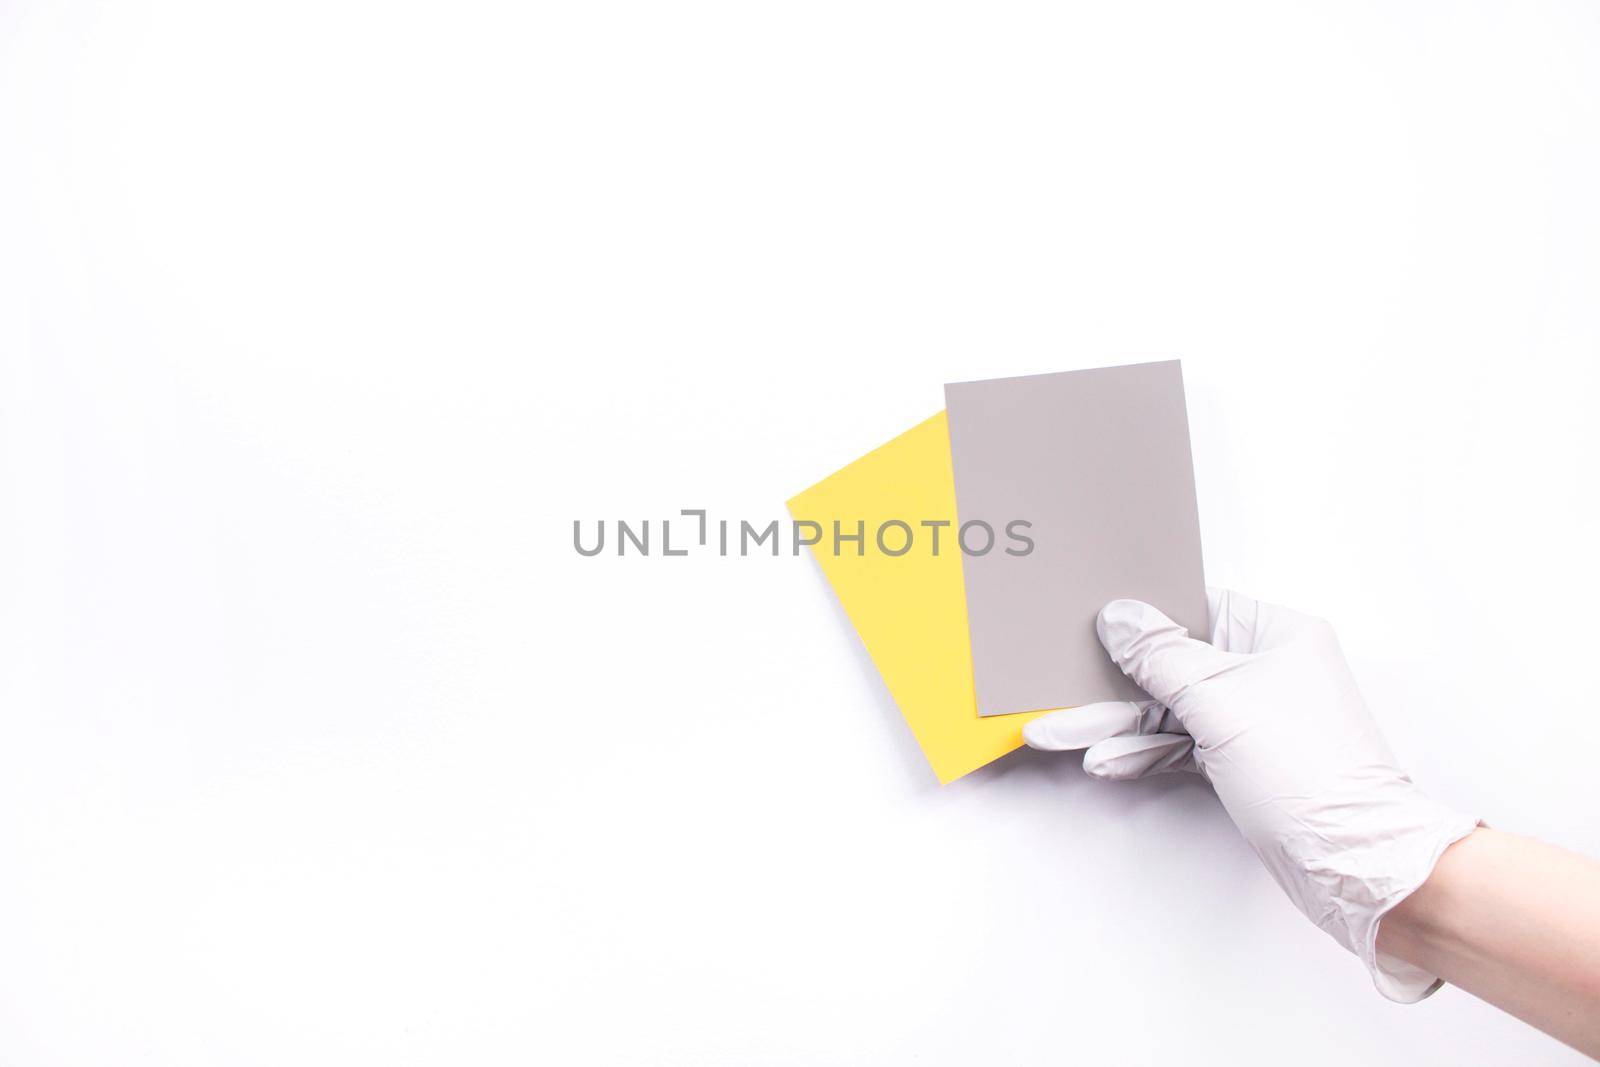 Women's hands hold swatches of the trendy colors - illuminating yellow and ultimate grey. Selection of year 2021 colors for design of clothes, interiors, websites and publications. by JuliaDorian